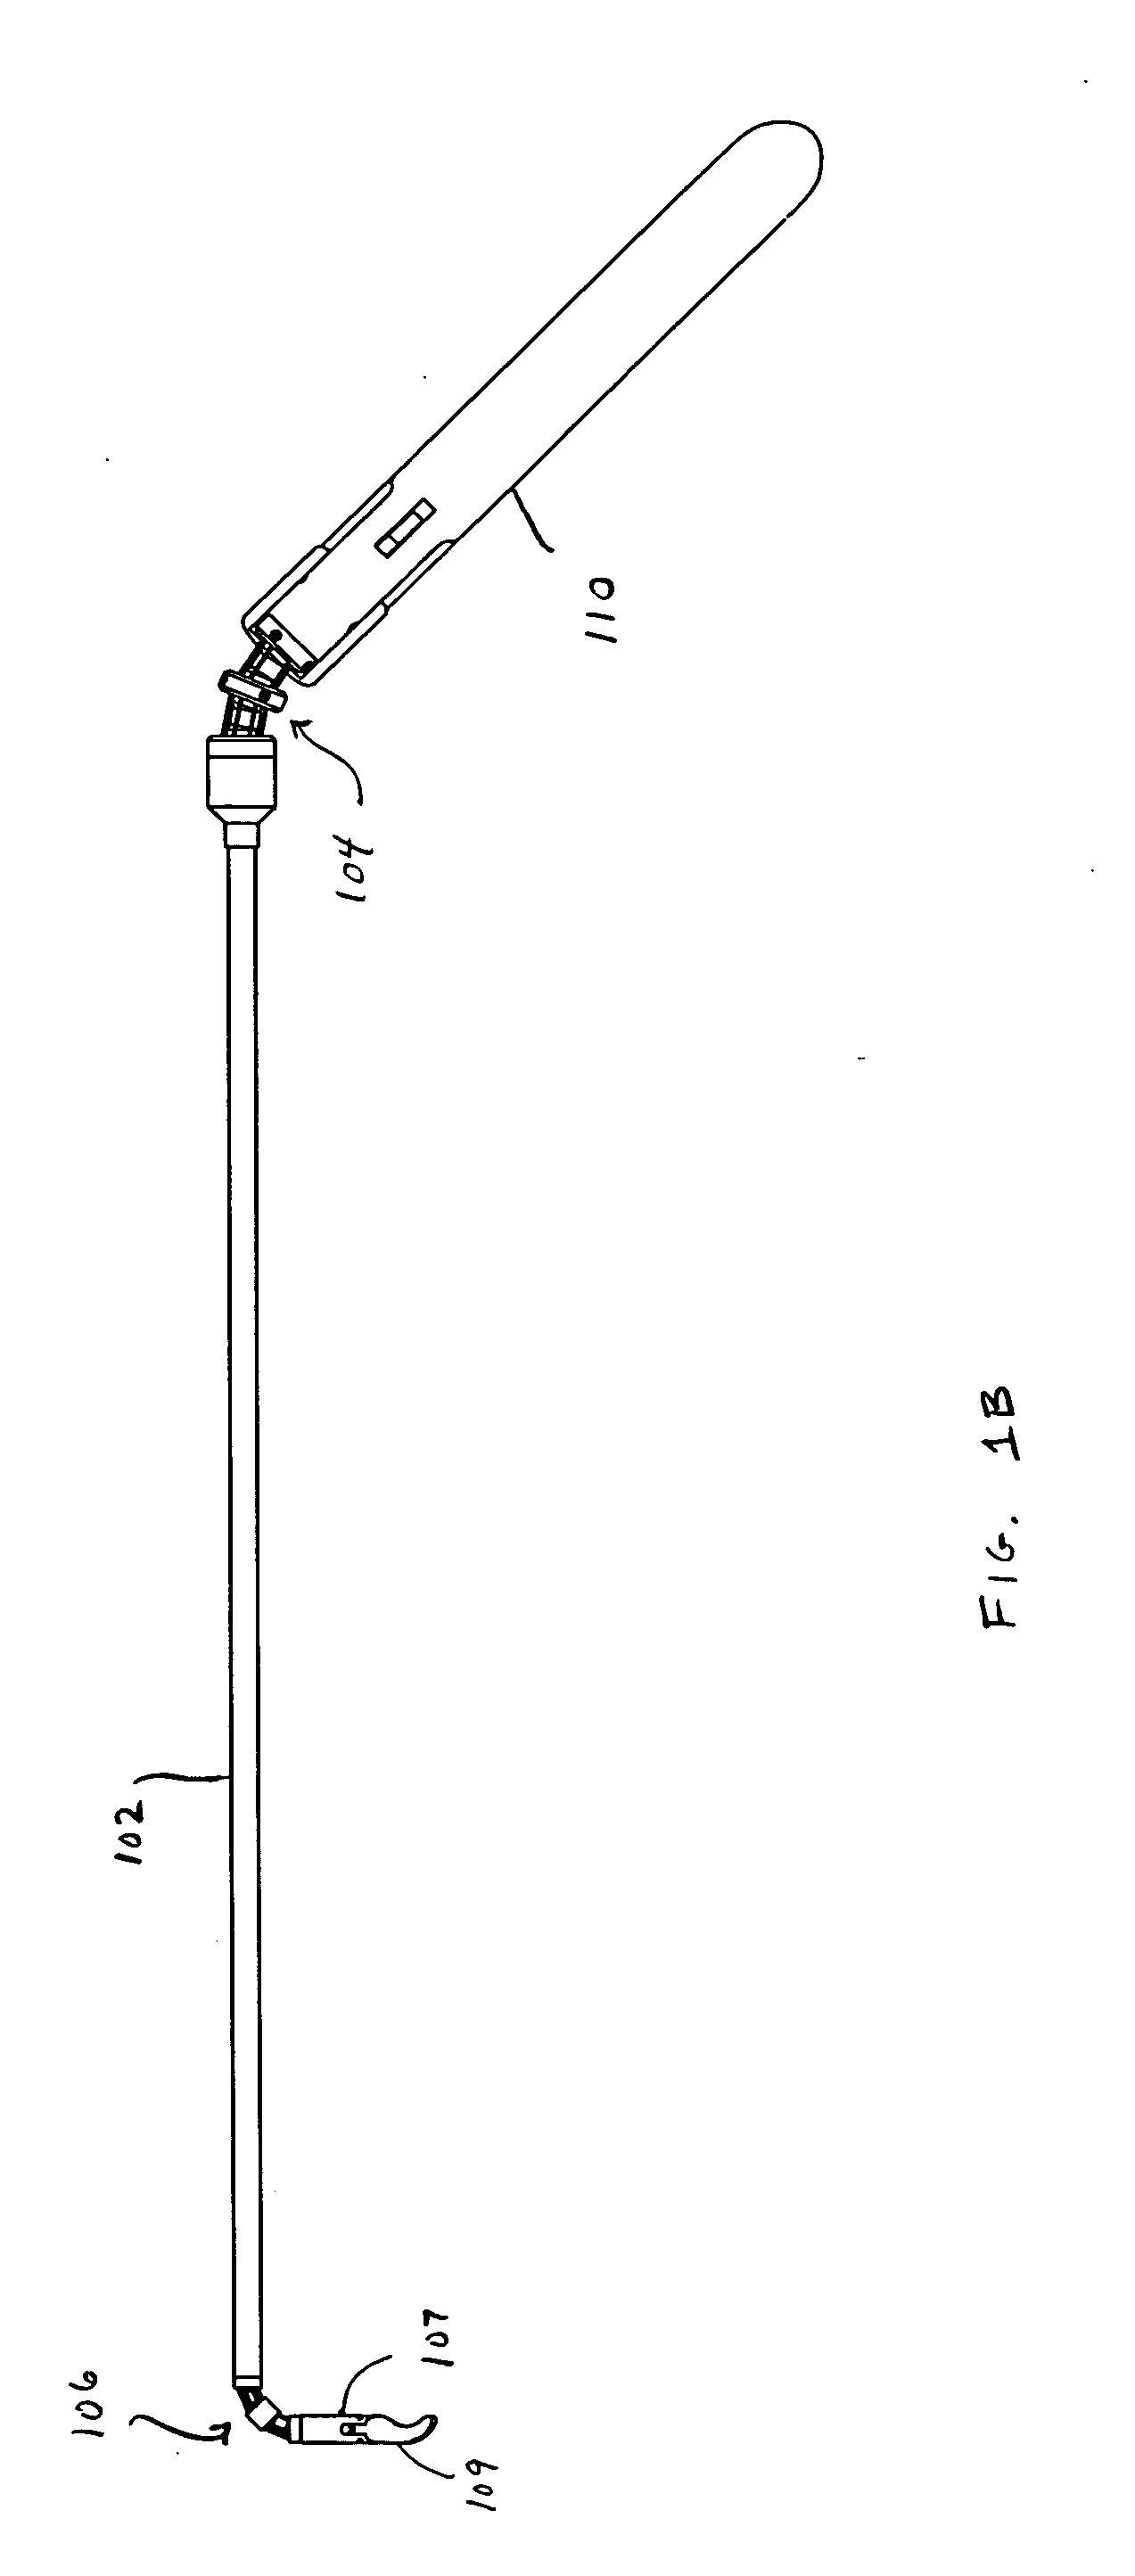 Link systems and articulation mechanisms for remote manipulation of surgical or diagnostic tools